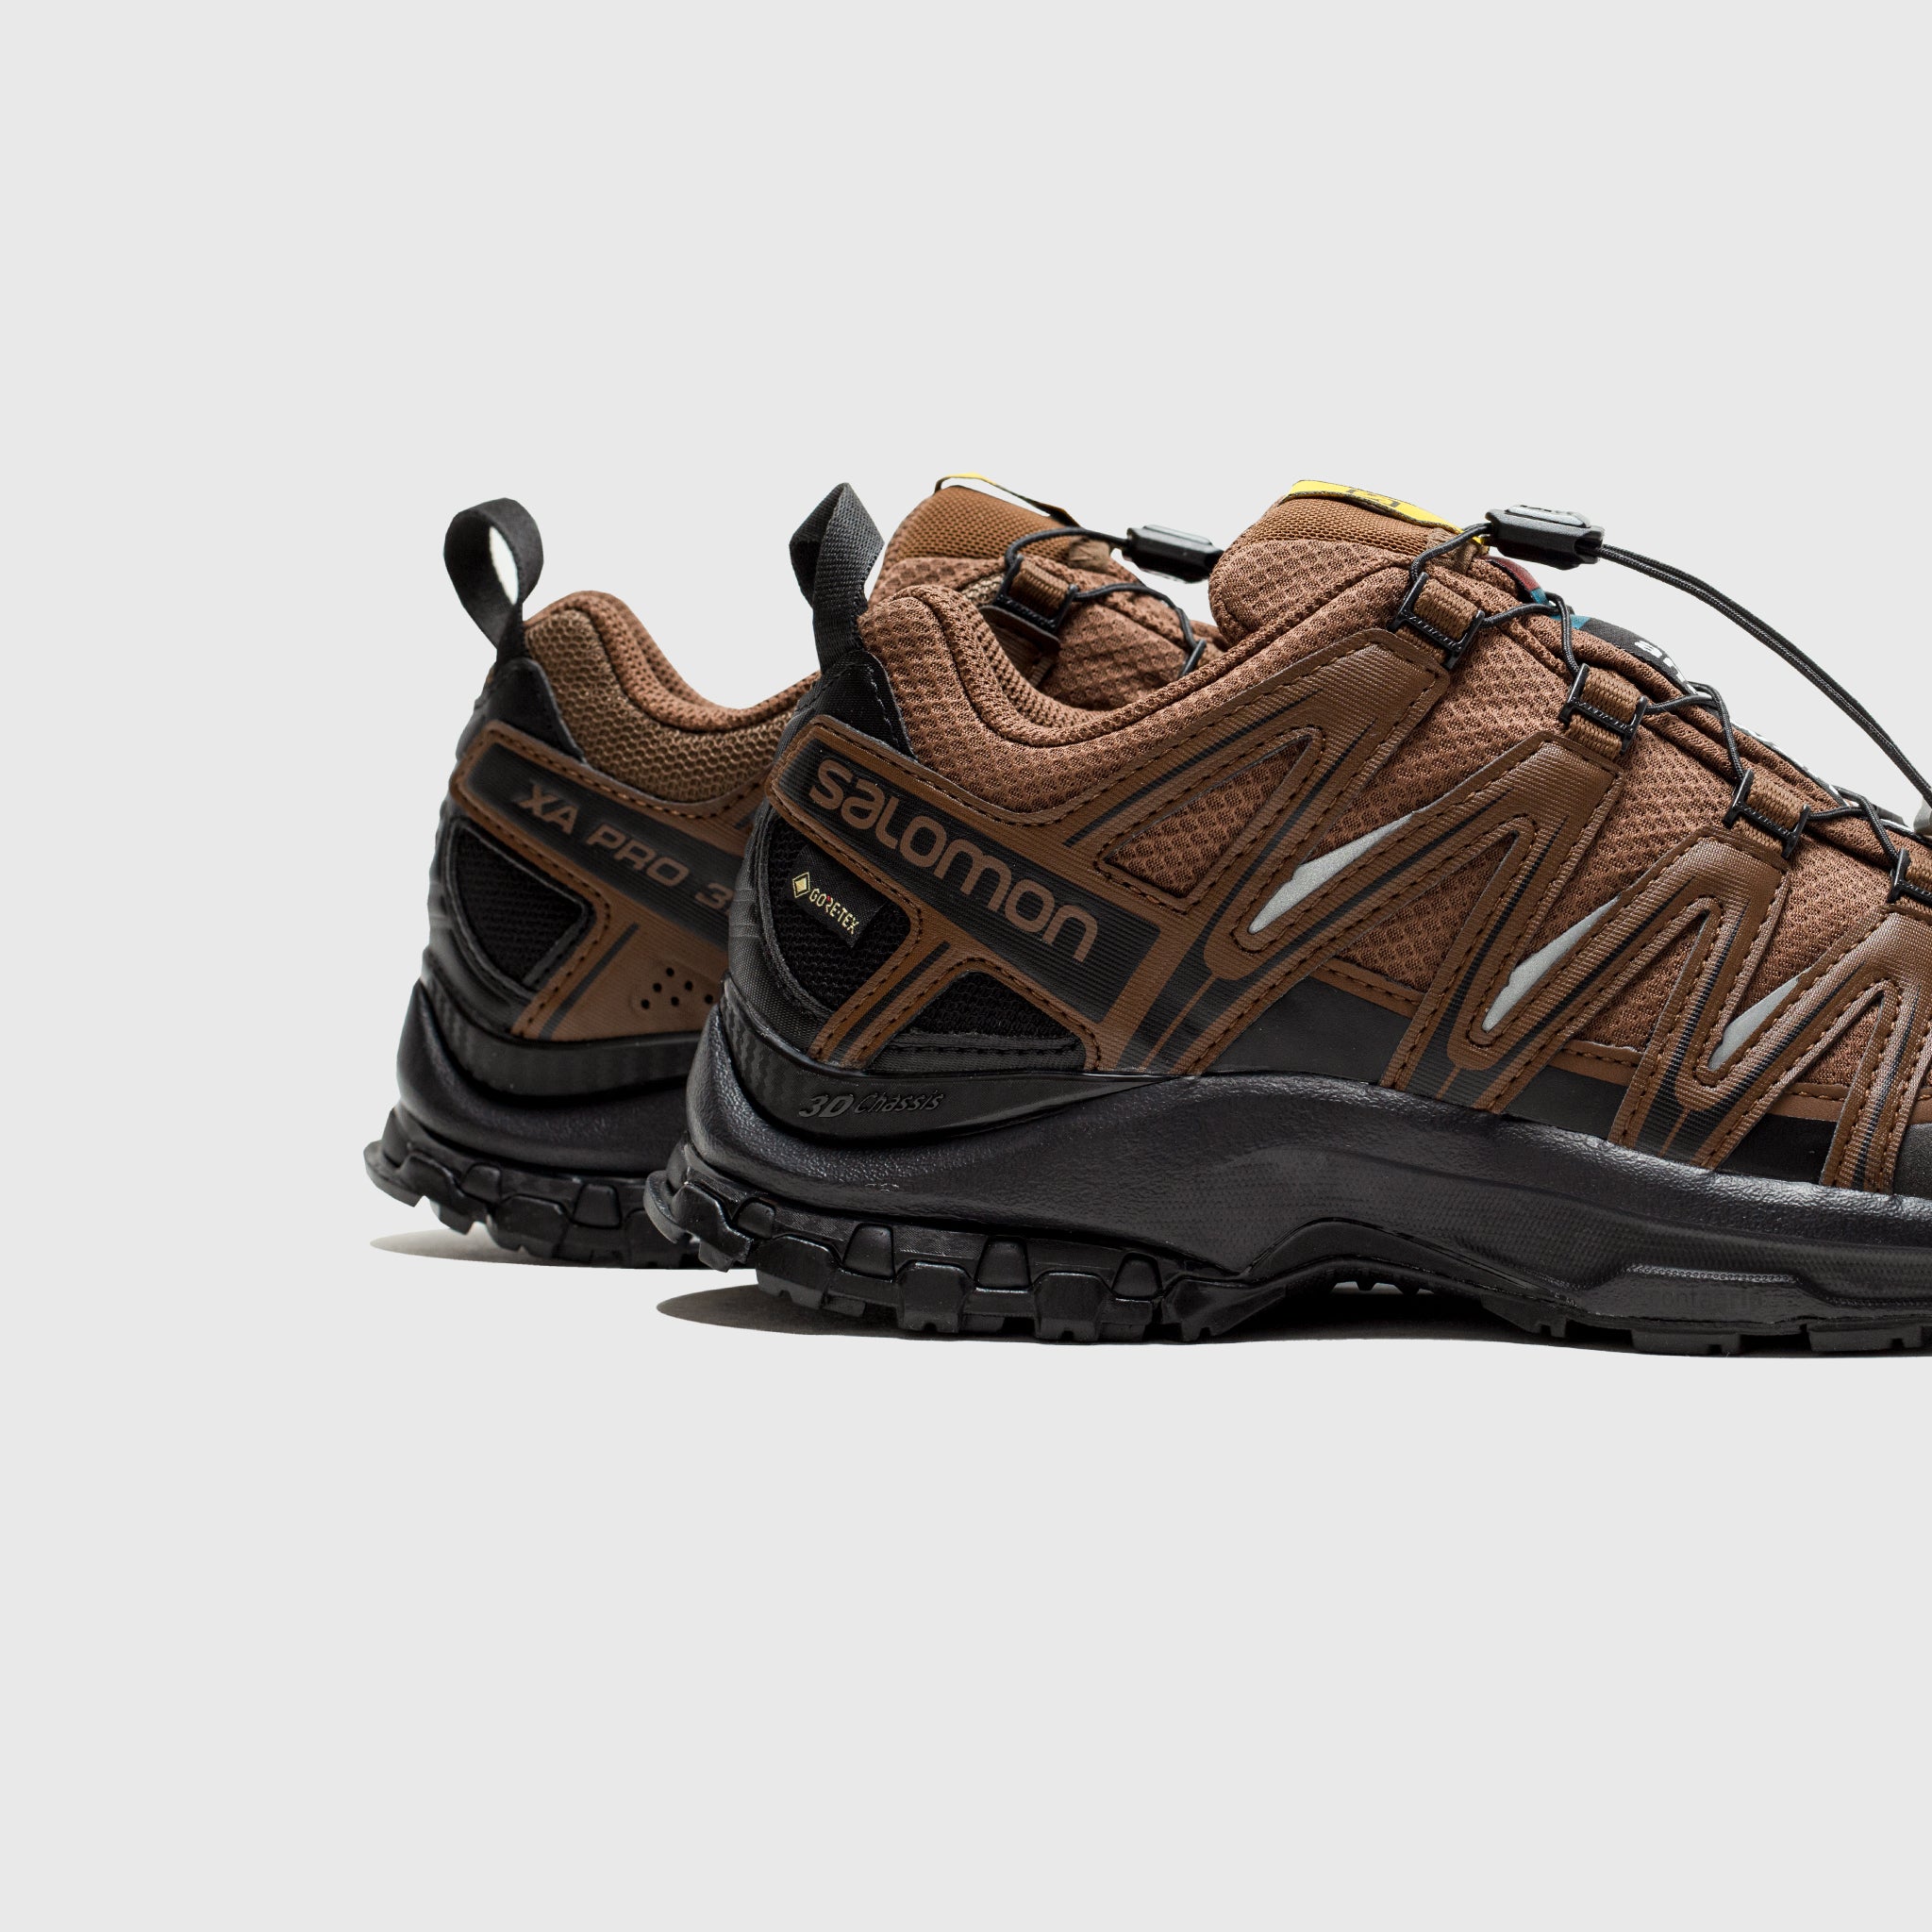 XA PRO 3D GORE-TEX FOR AND WANDER – PACKER SHOES